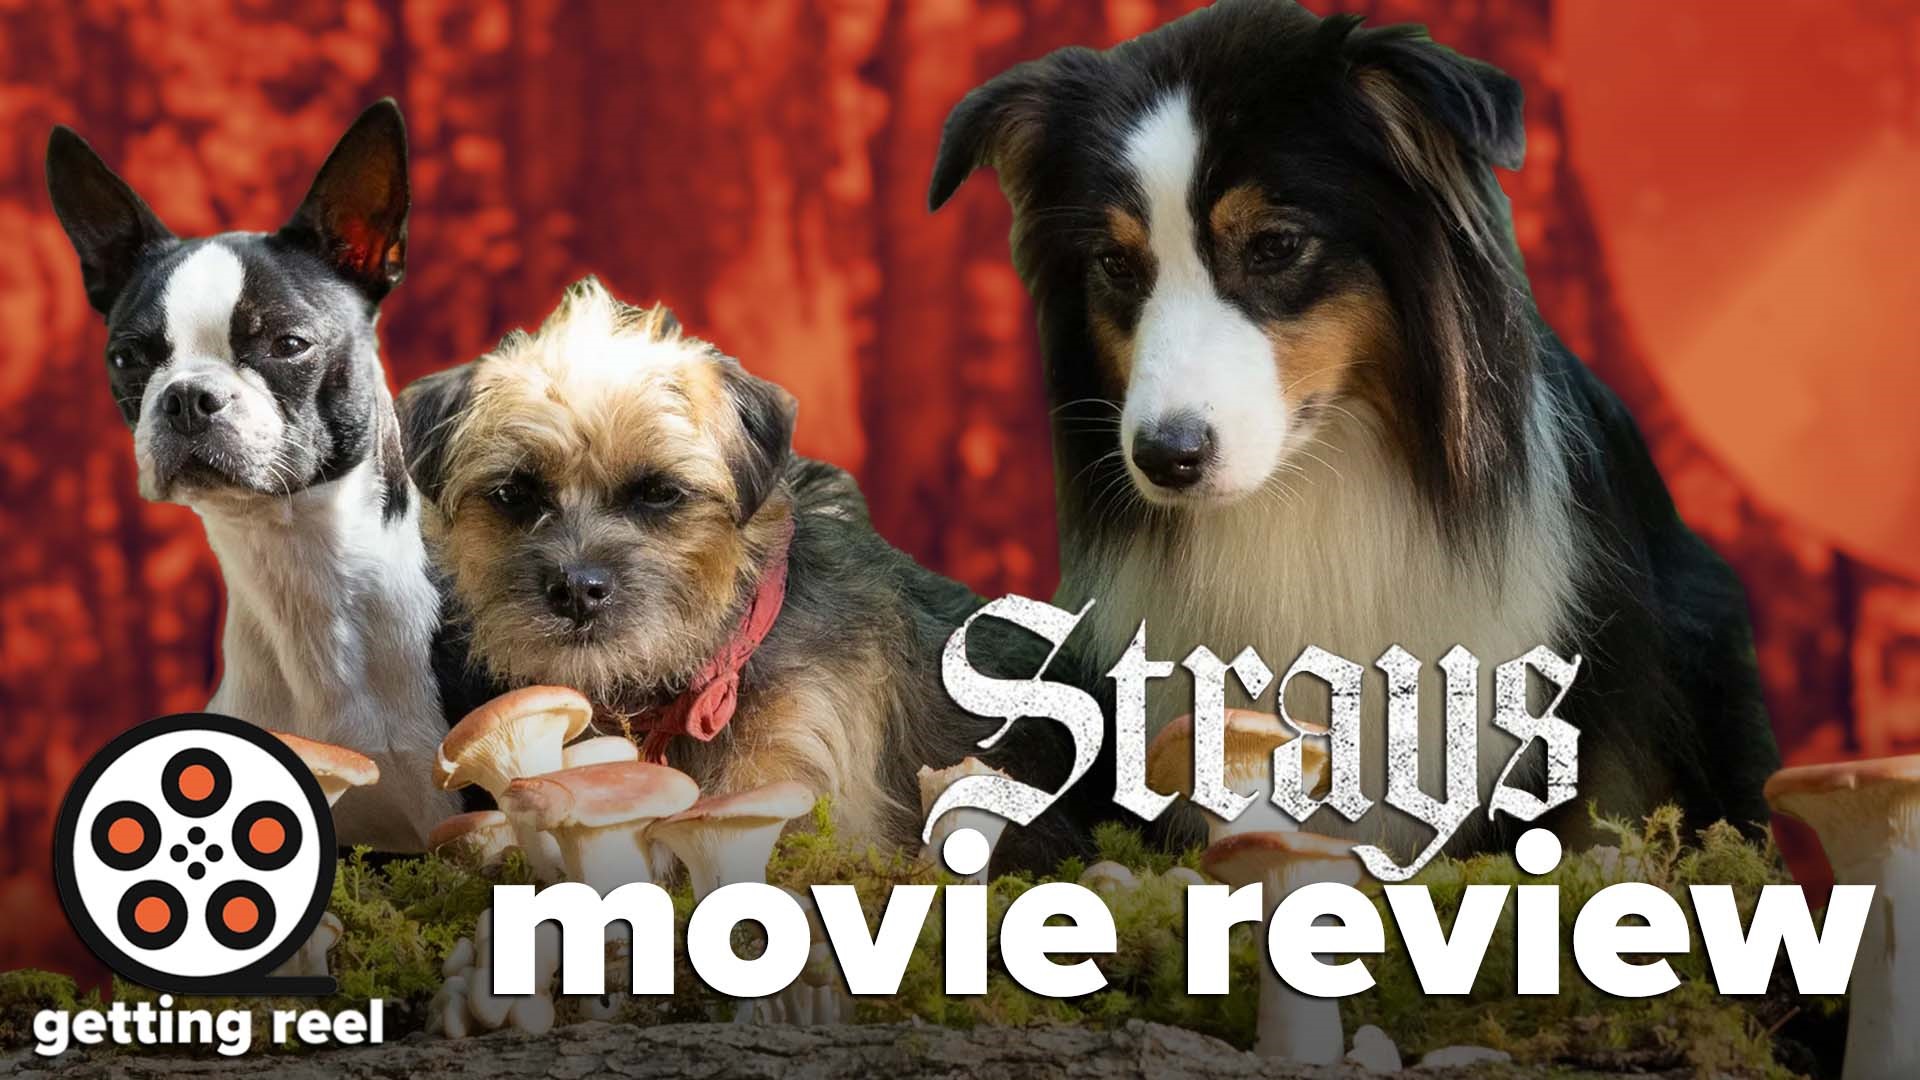 Our resident dog movie reviewer Zach gets one right down the plate for a very raunchy, sometimes funny dog movie for adults.